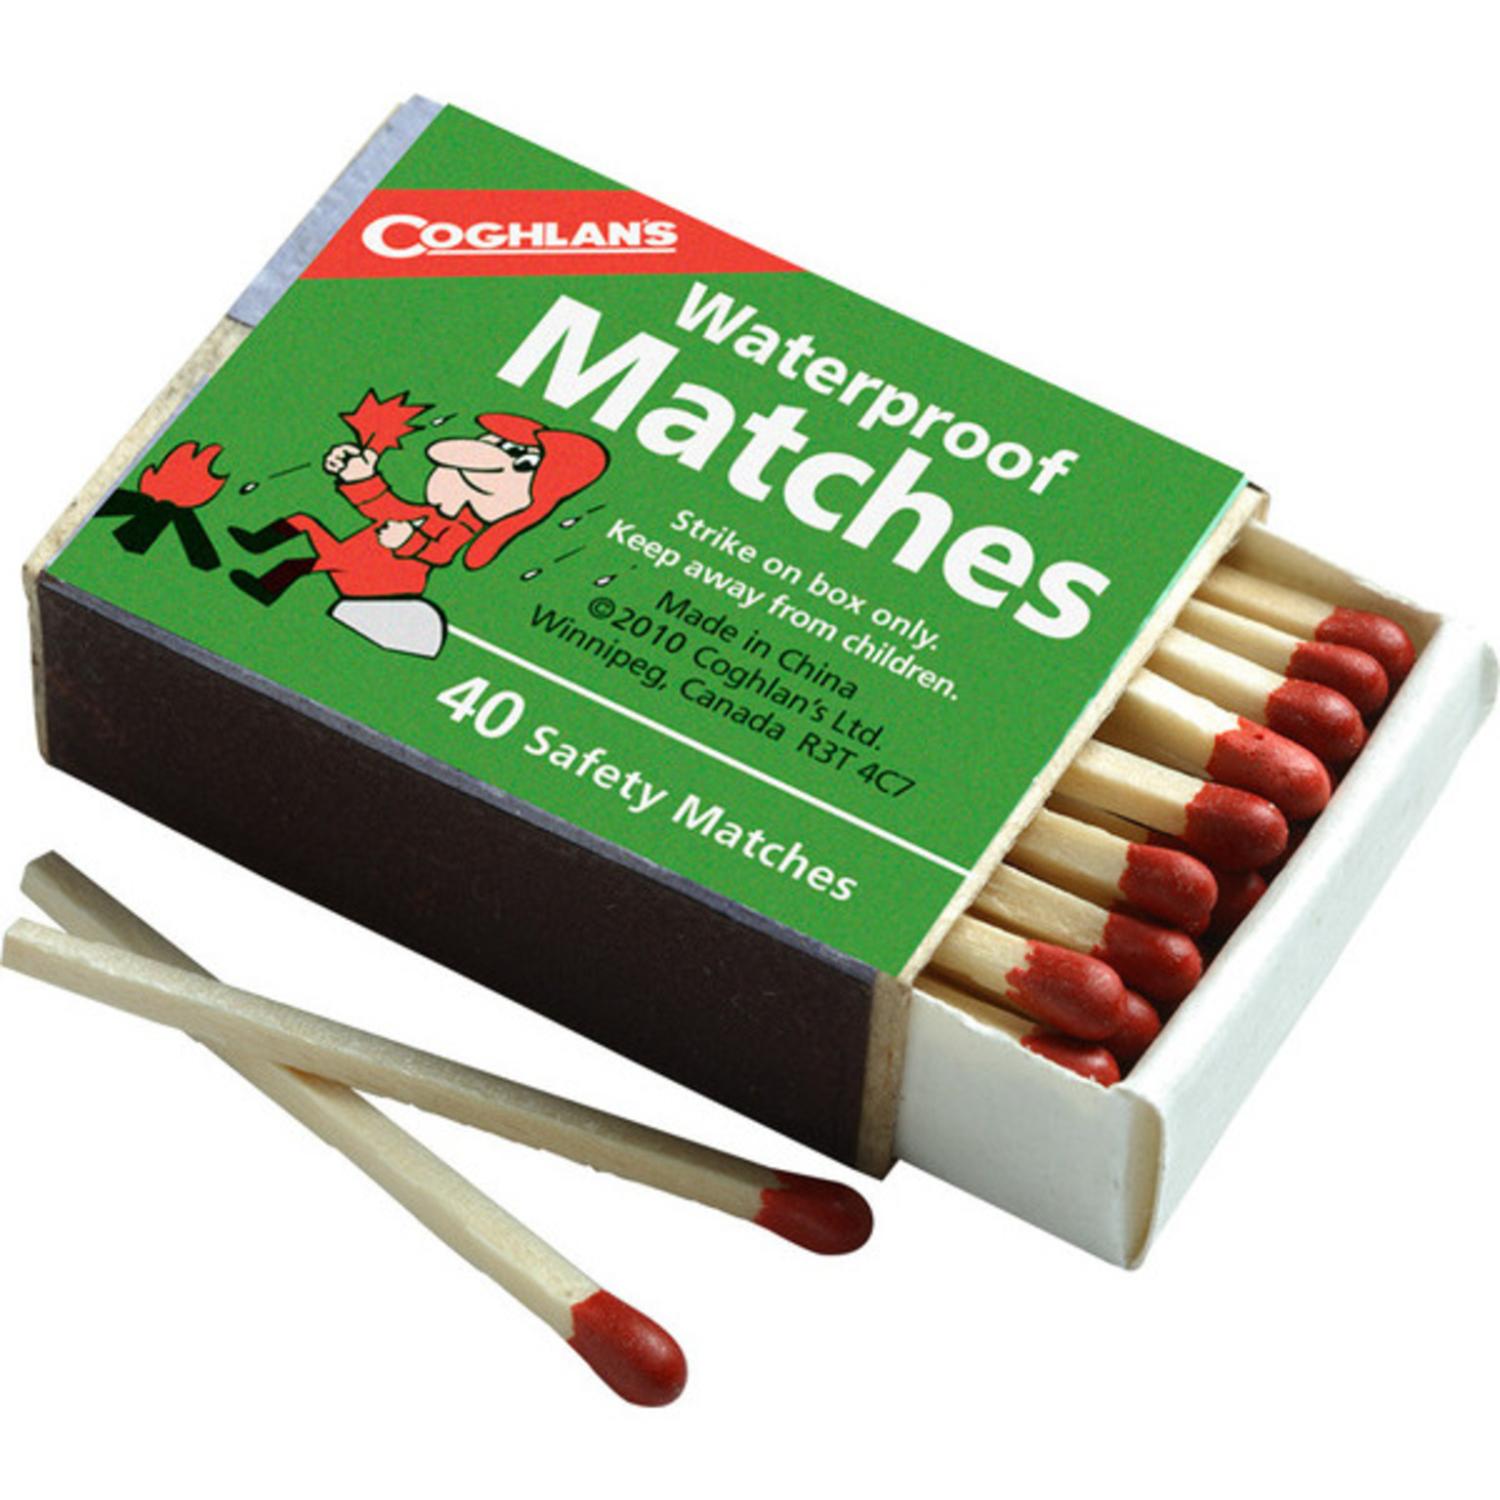 Coghlans Waterproof Matches,4-Pack